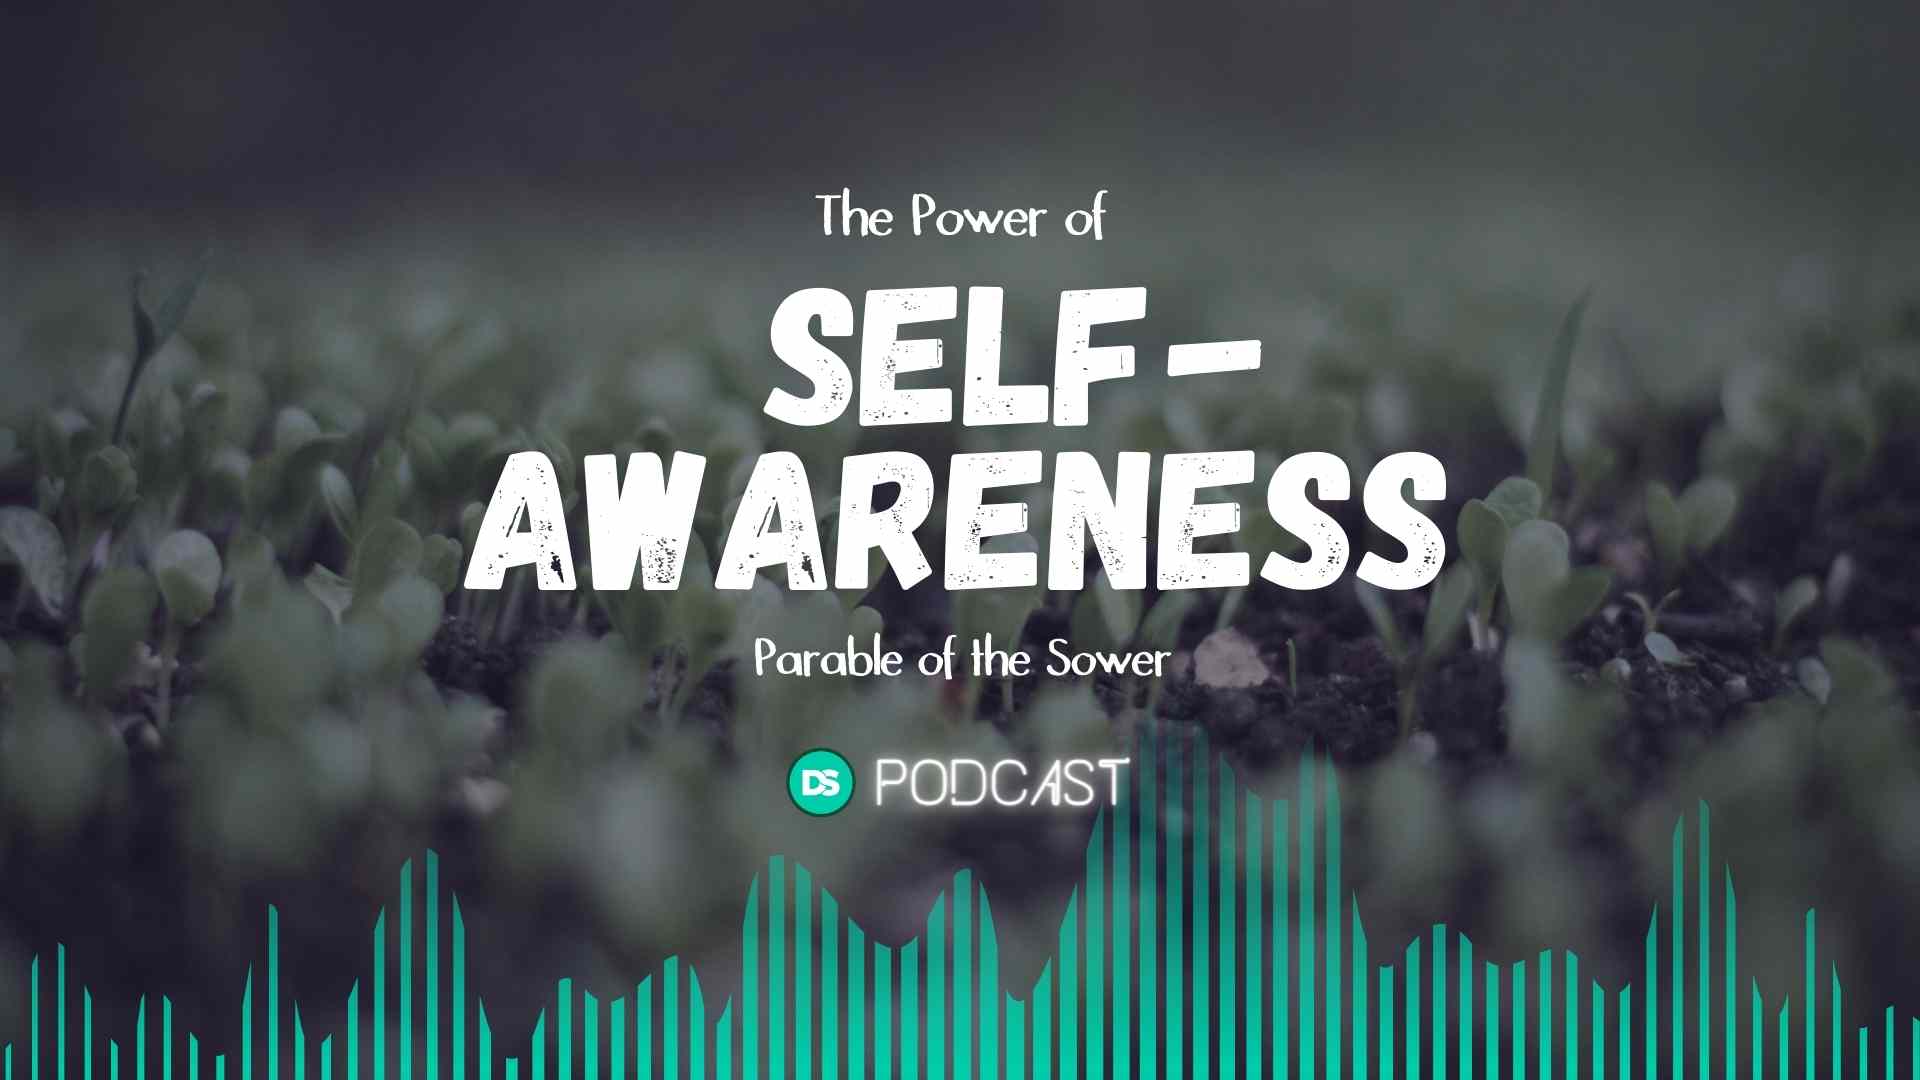 The Parable of the Sower and the Power of Self-Awareness 14